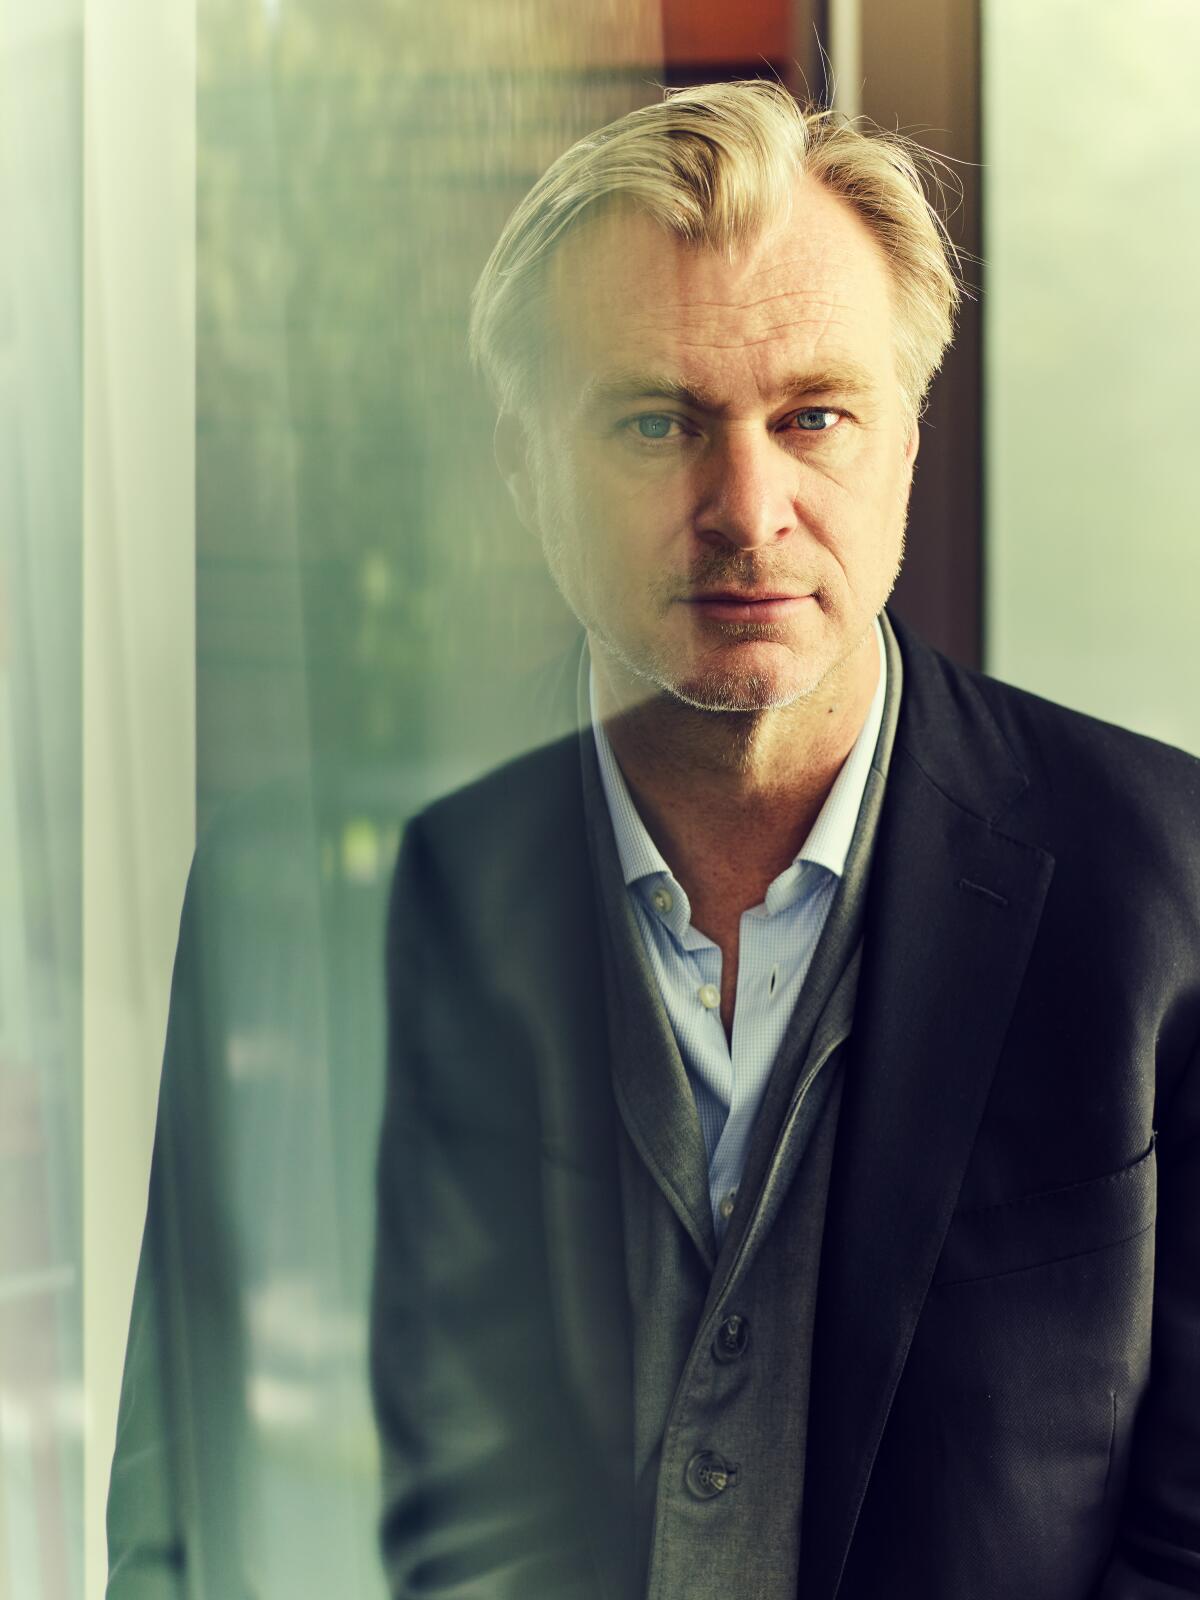 A blond, middle-aged man in a suit with no tie (Christopher Nolan) seen through glass with a translucent reflection 